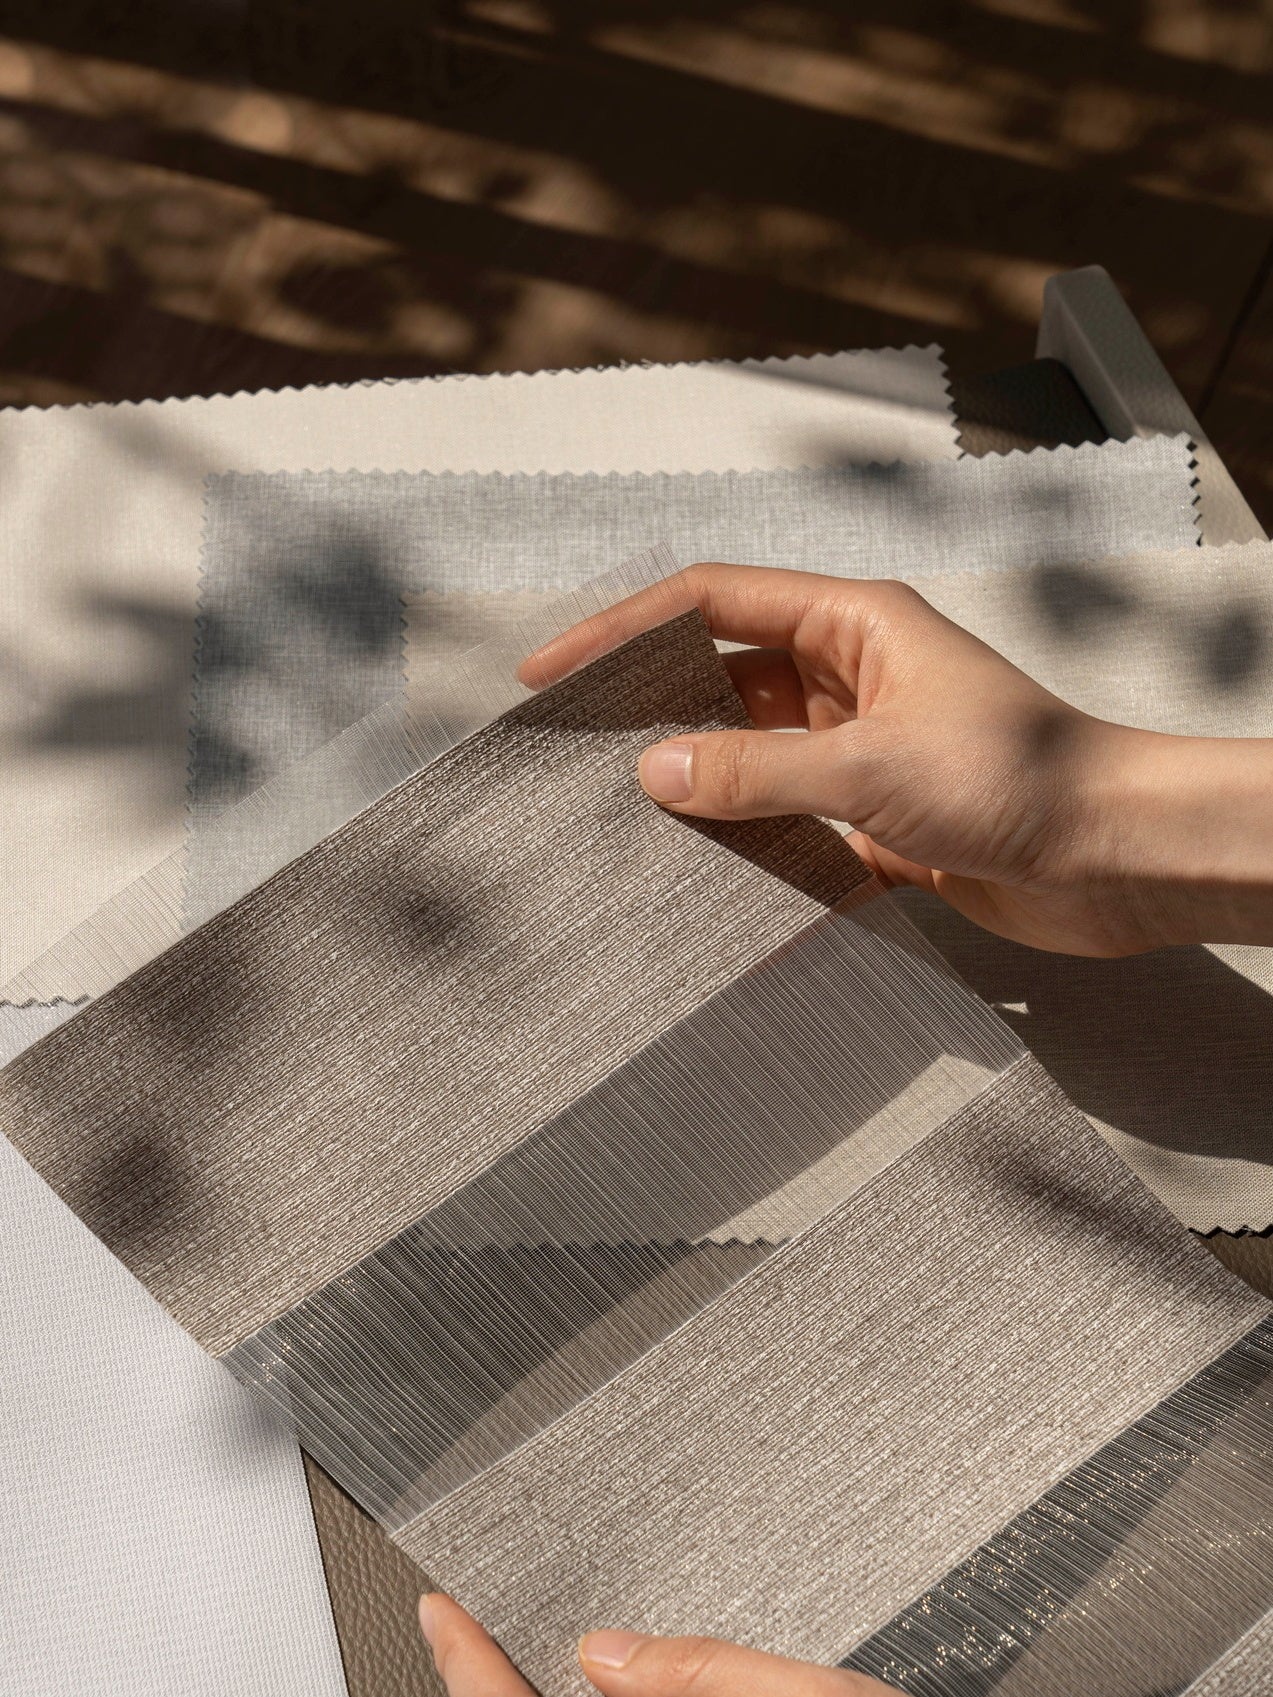 Customer evaluating texture and light-blocking qualities of curtain fabric samples from EaseEaseCurtains' free sample collection